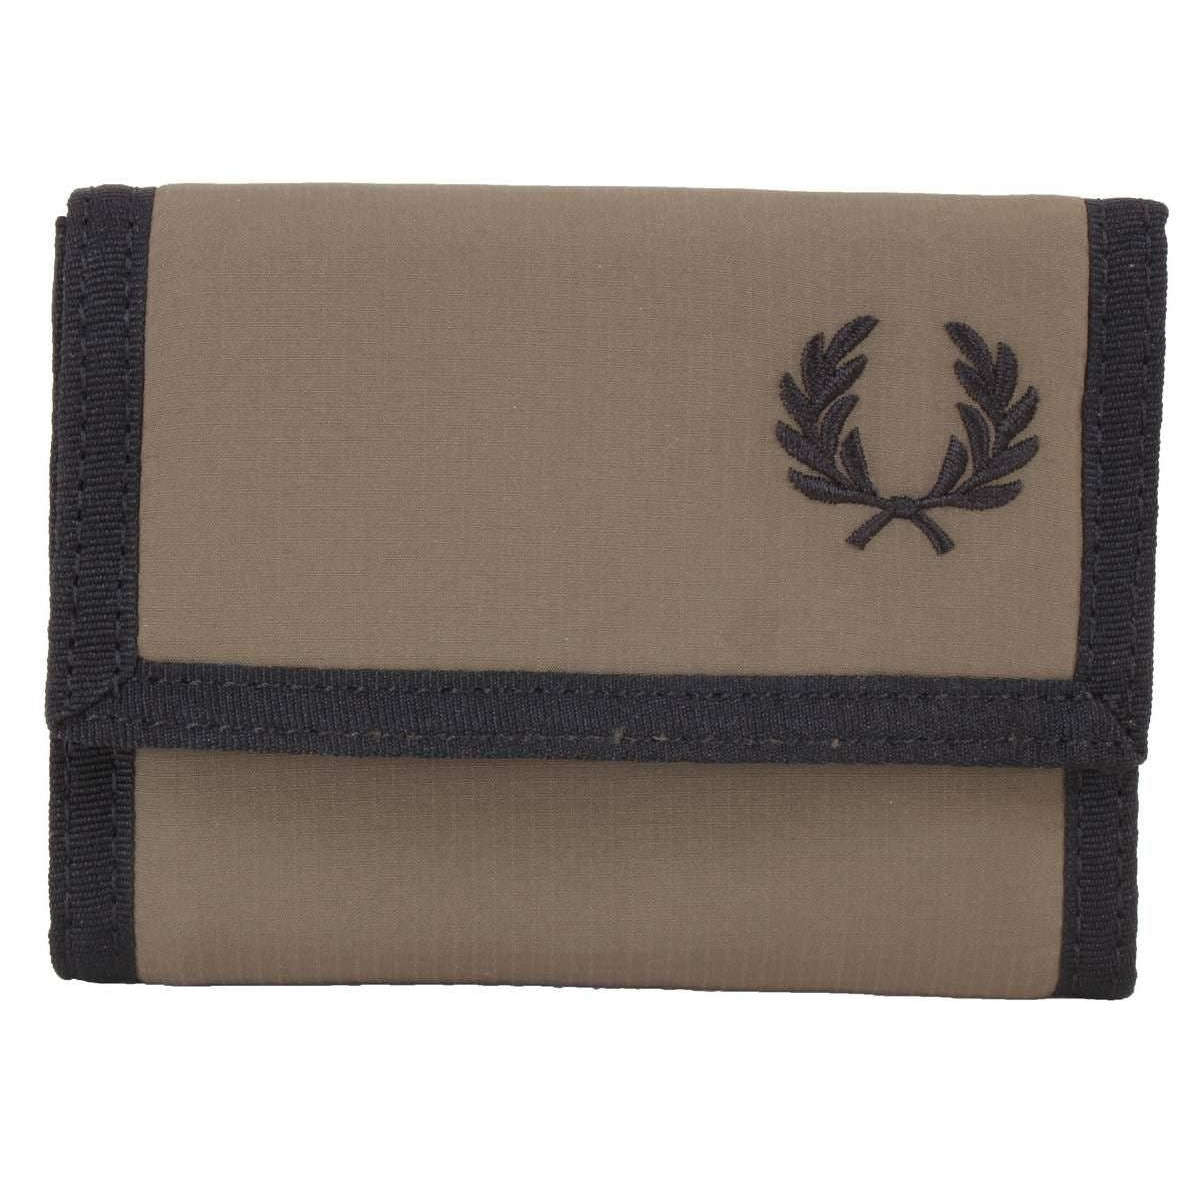 Fred Perry Ripstop Folded Wallet - Uniform Green